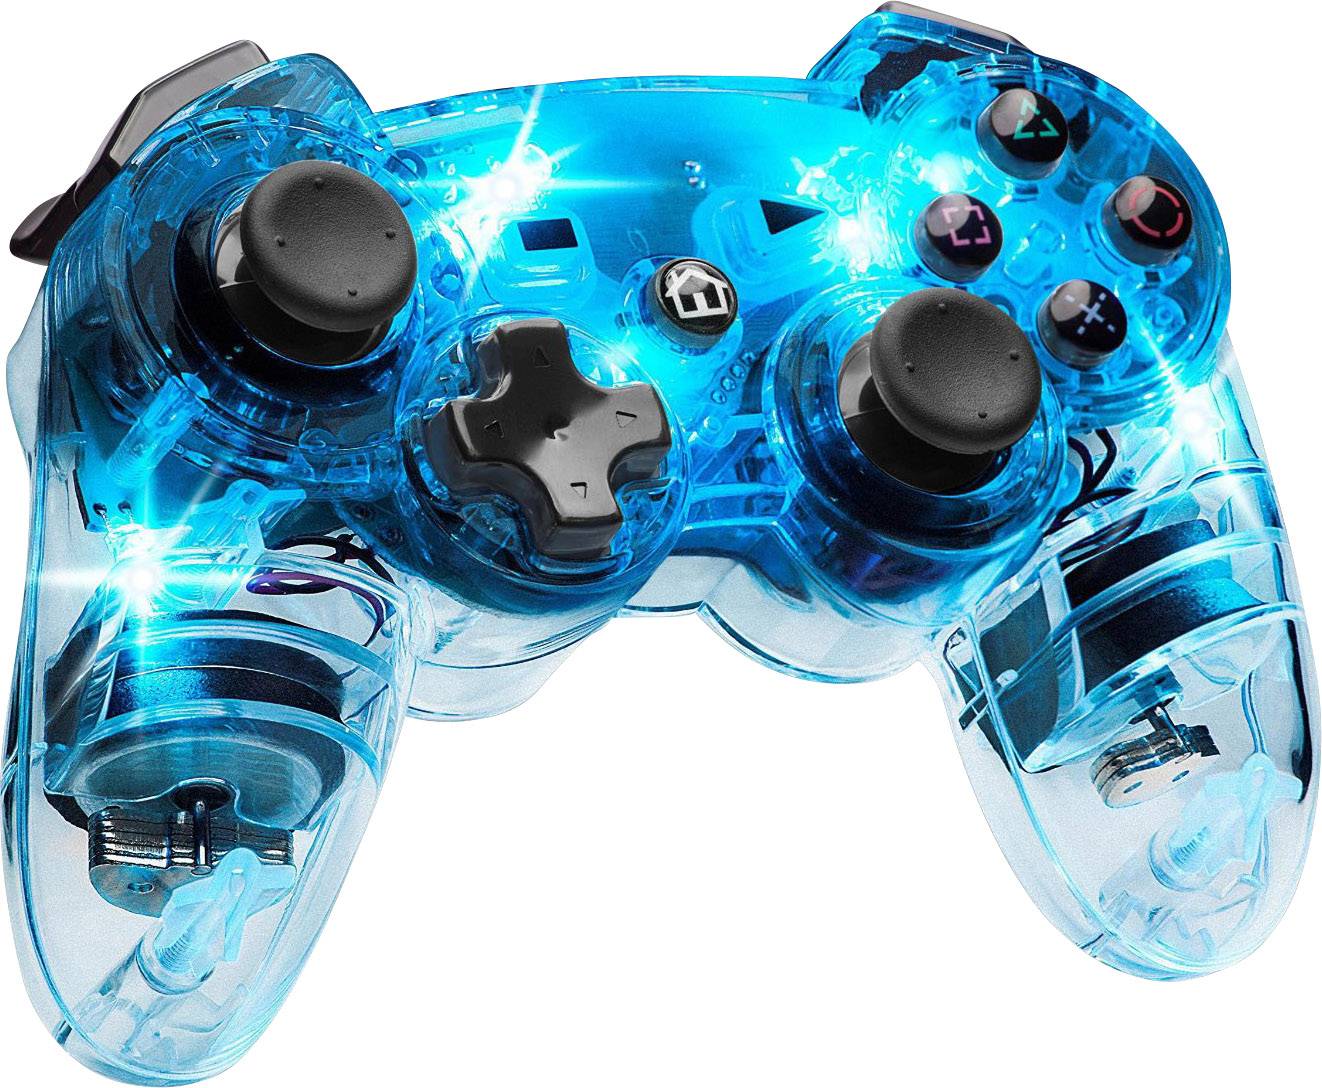 afterglow ps3 controller on valve portal pc